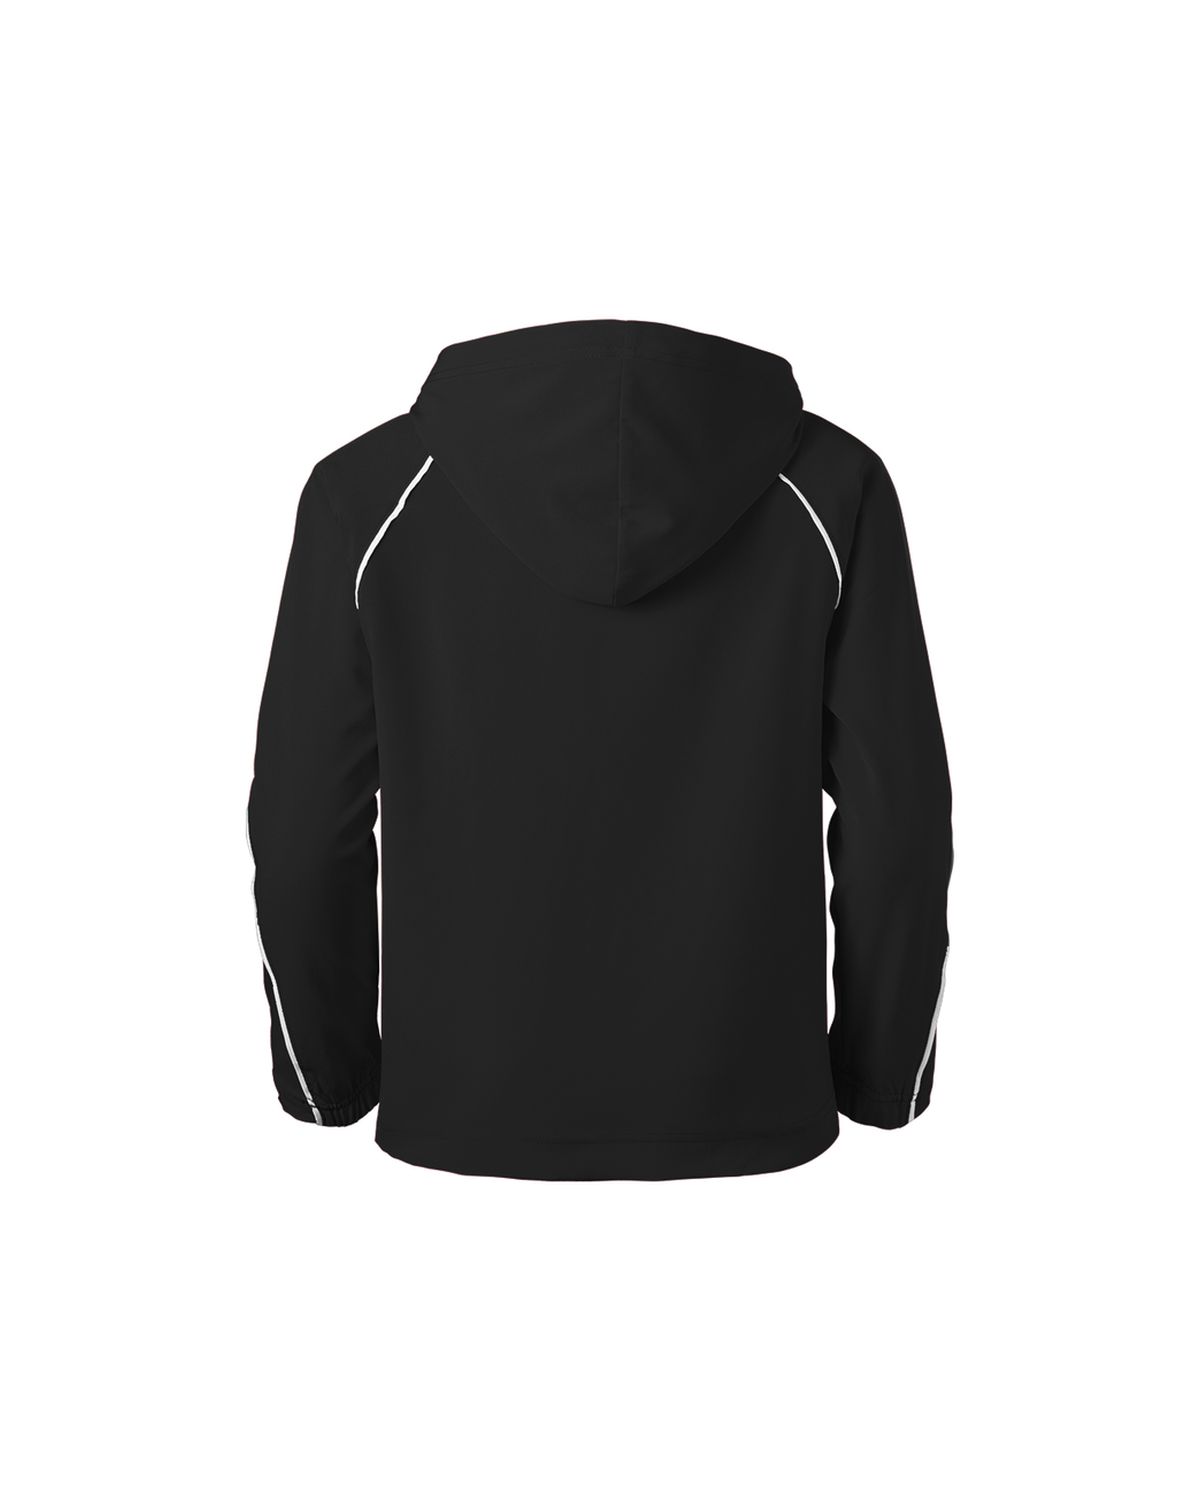 'Soffe 1027Y Youth Game Time Warm Up Hoodie'